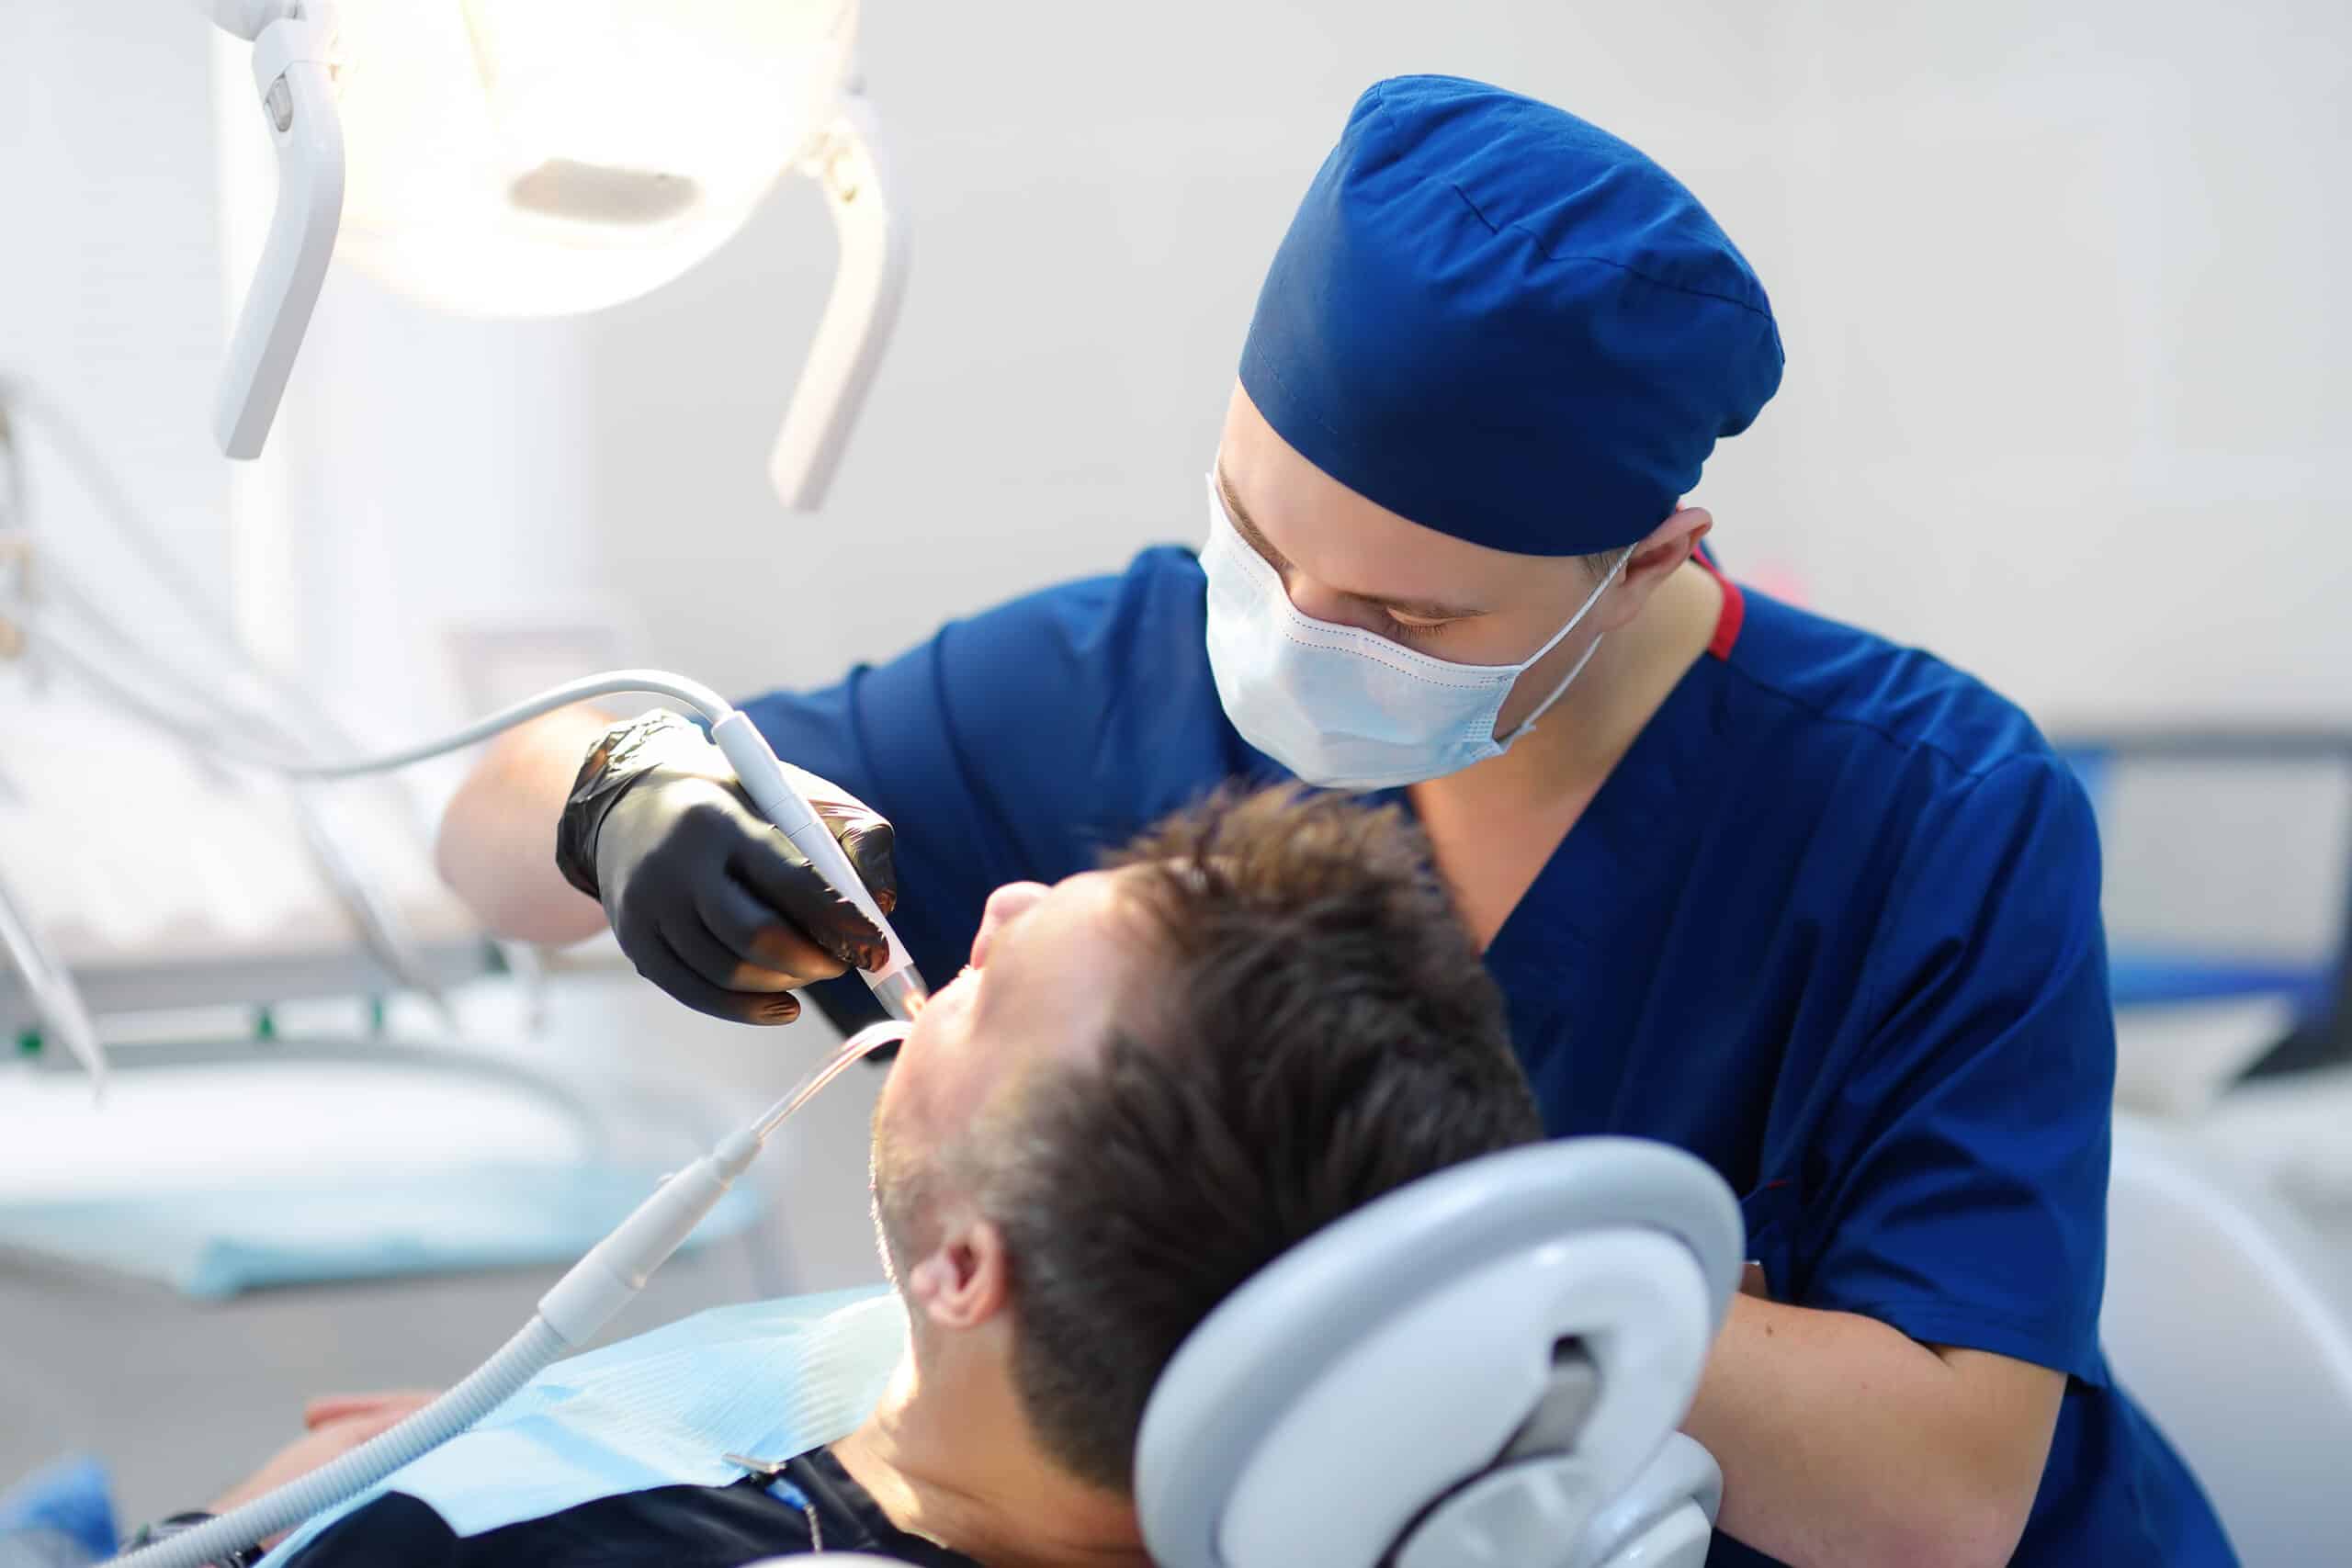 Dentist and patient at medical center. Doctor treats a mature man teeth with dental drill. Orthodontist and prosthetics appointment. Hygiene and teeth healthy.